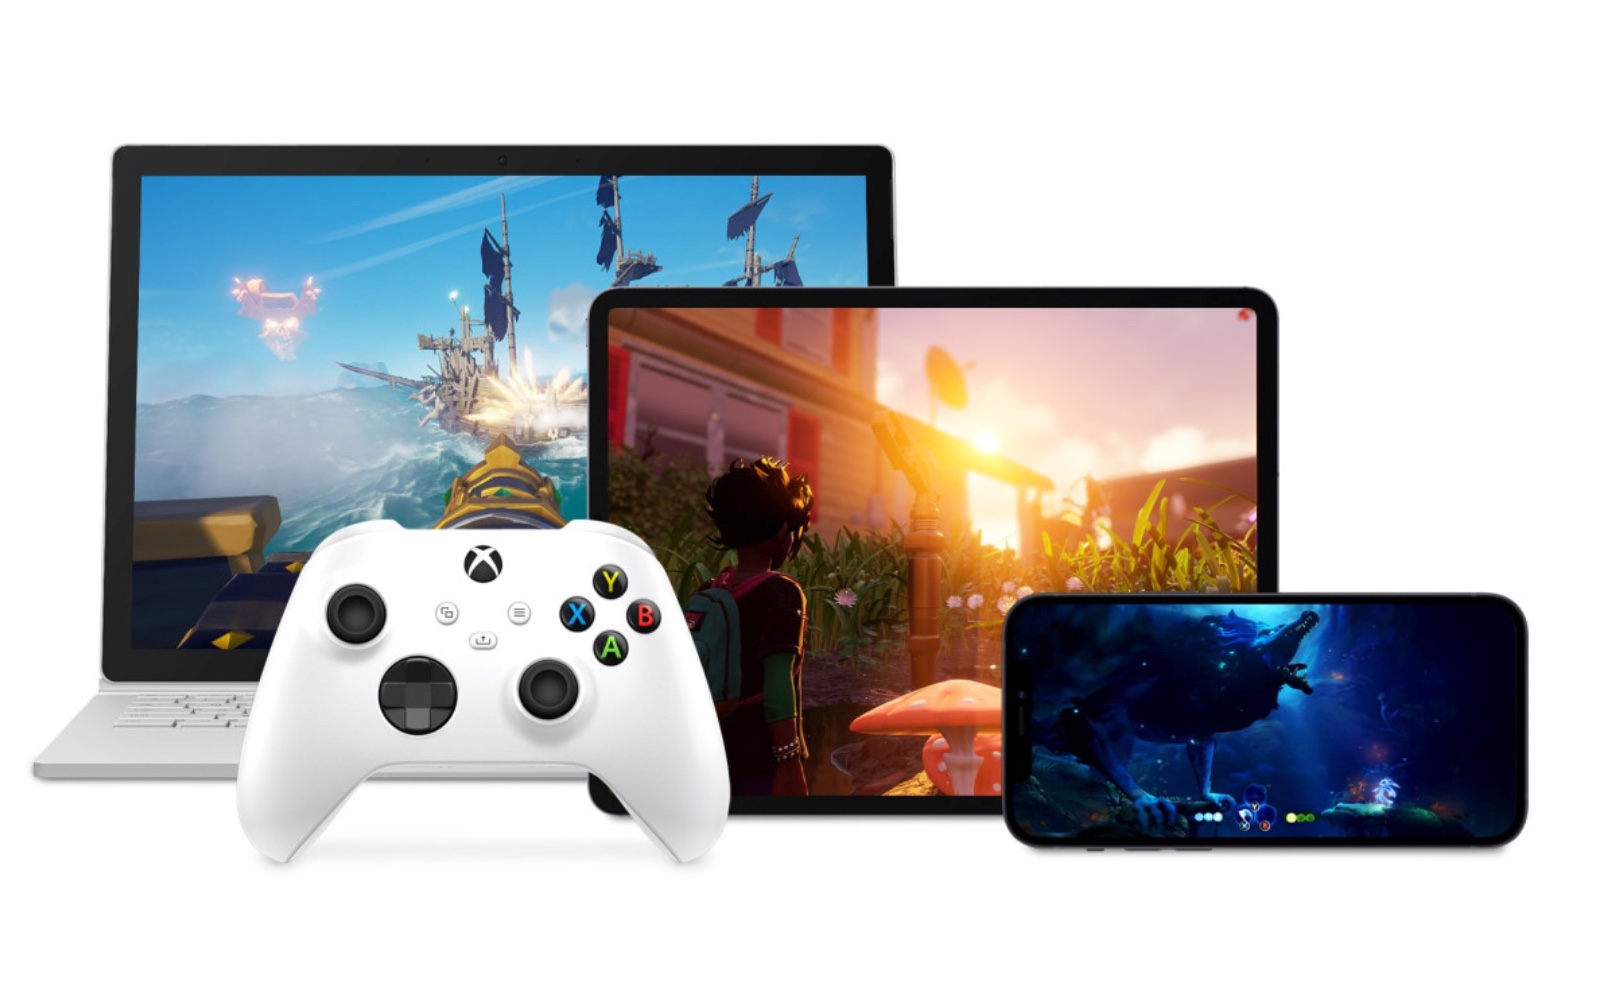 Xbox Game Pass Ultimate Delivers 100+ Games Directly to Your Mobile Device  Beginning September 15 - Xbox Wire